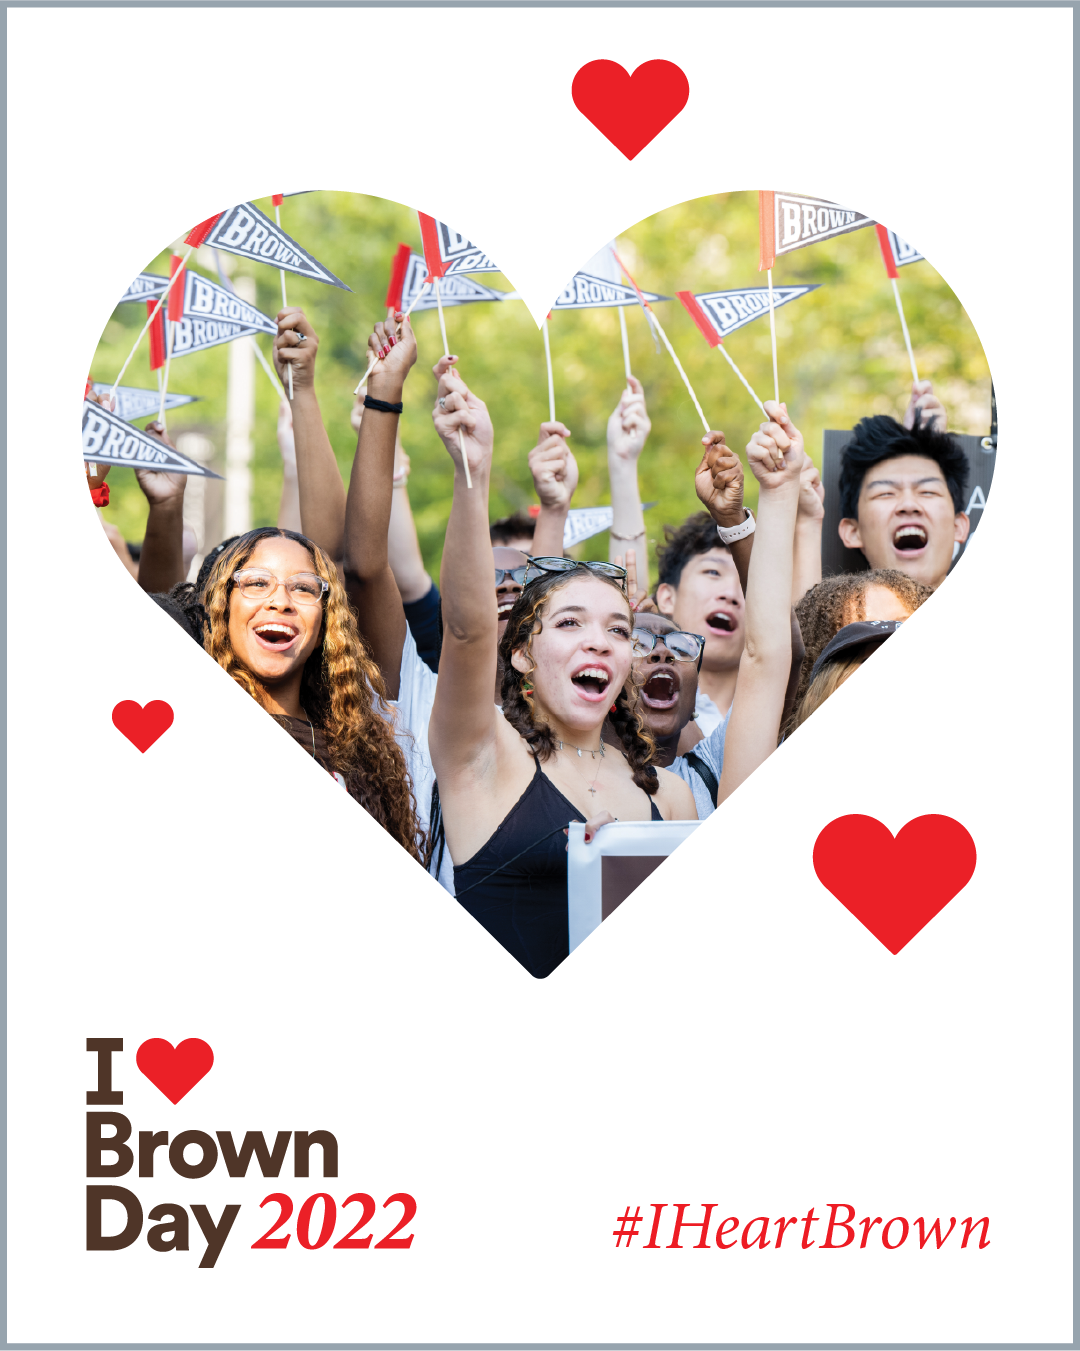 Photo of students cheering cut out in the shape of a heard on a white background with the I Heart Brown Day logo in the bottom left corner